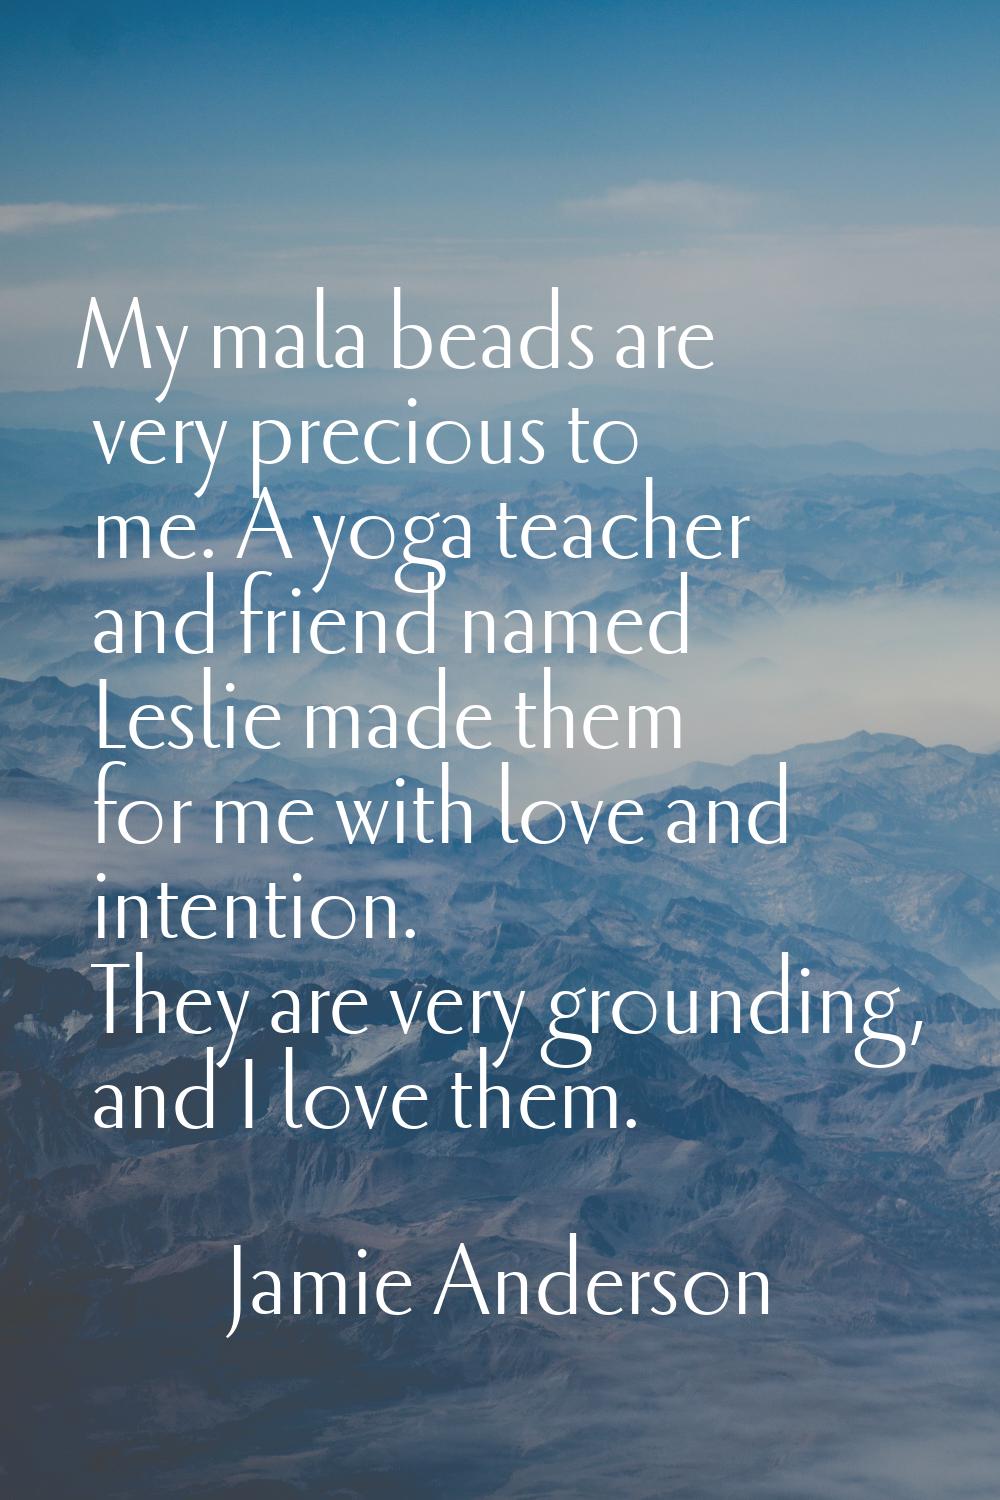 My mala beads are very precious to me. A yoga teacher and friend named Leslie made them for me with